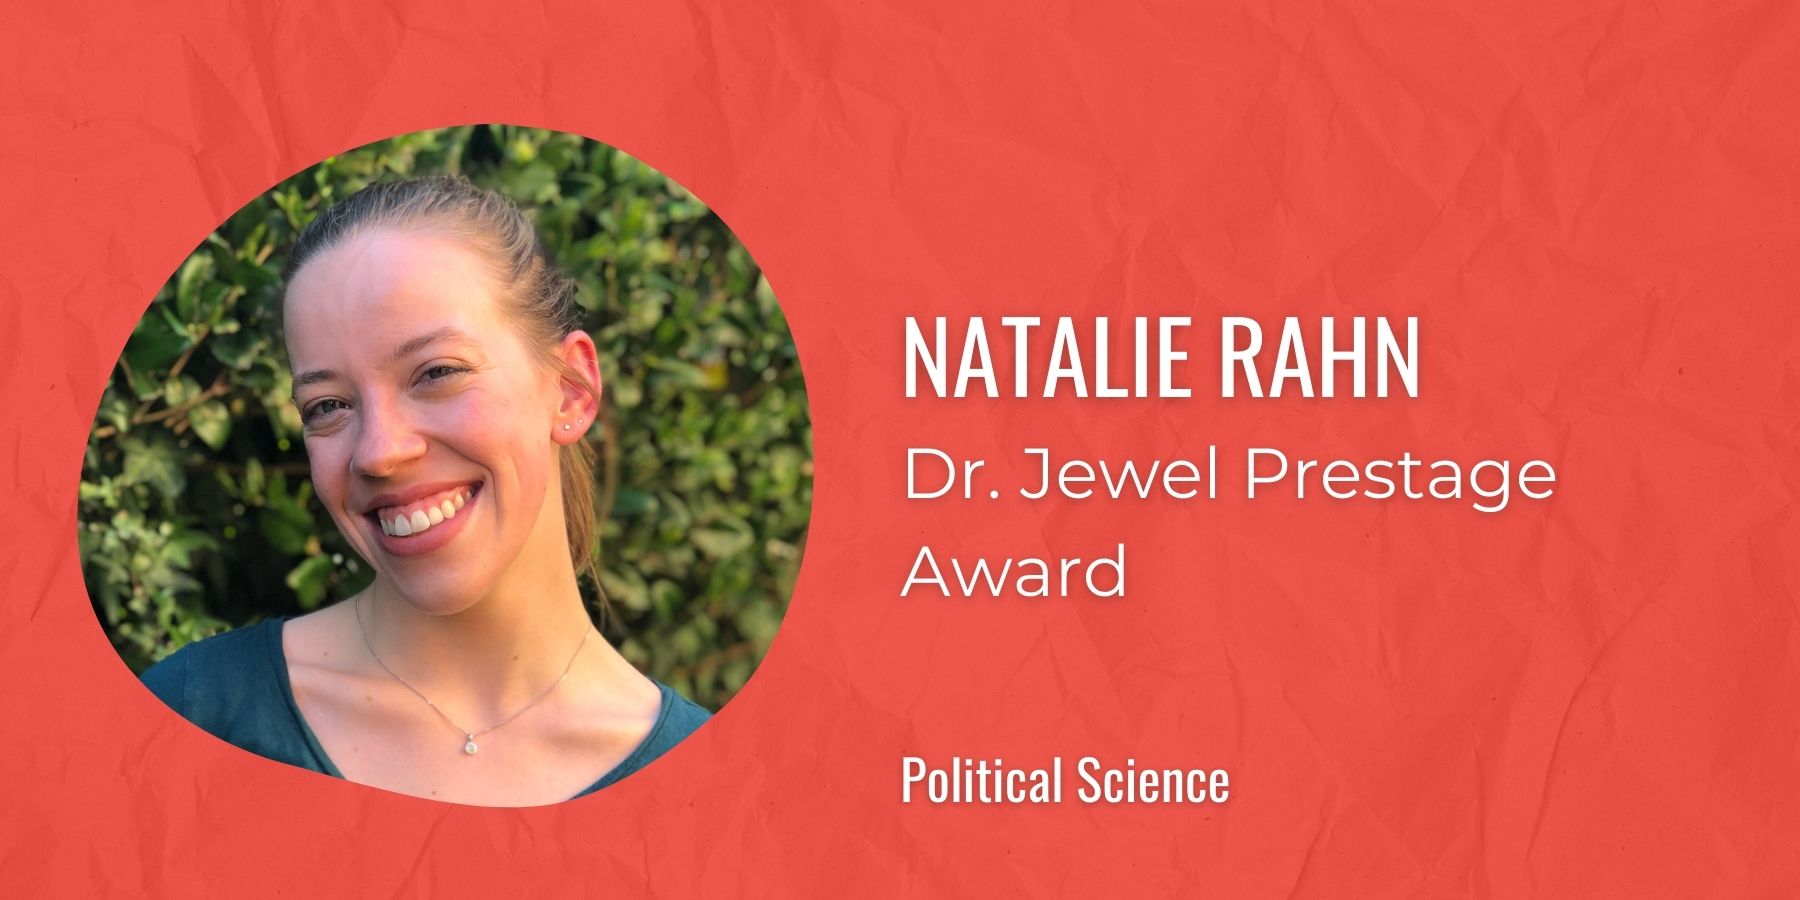 Image of Natalie Rahn with text: Dr. Jewel Prestage Award, Political Science
